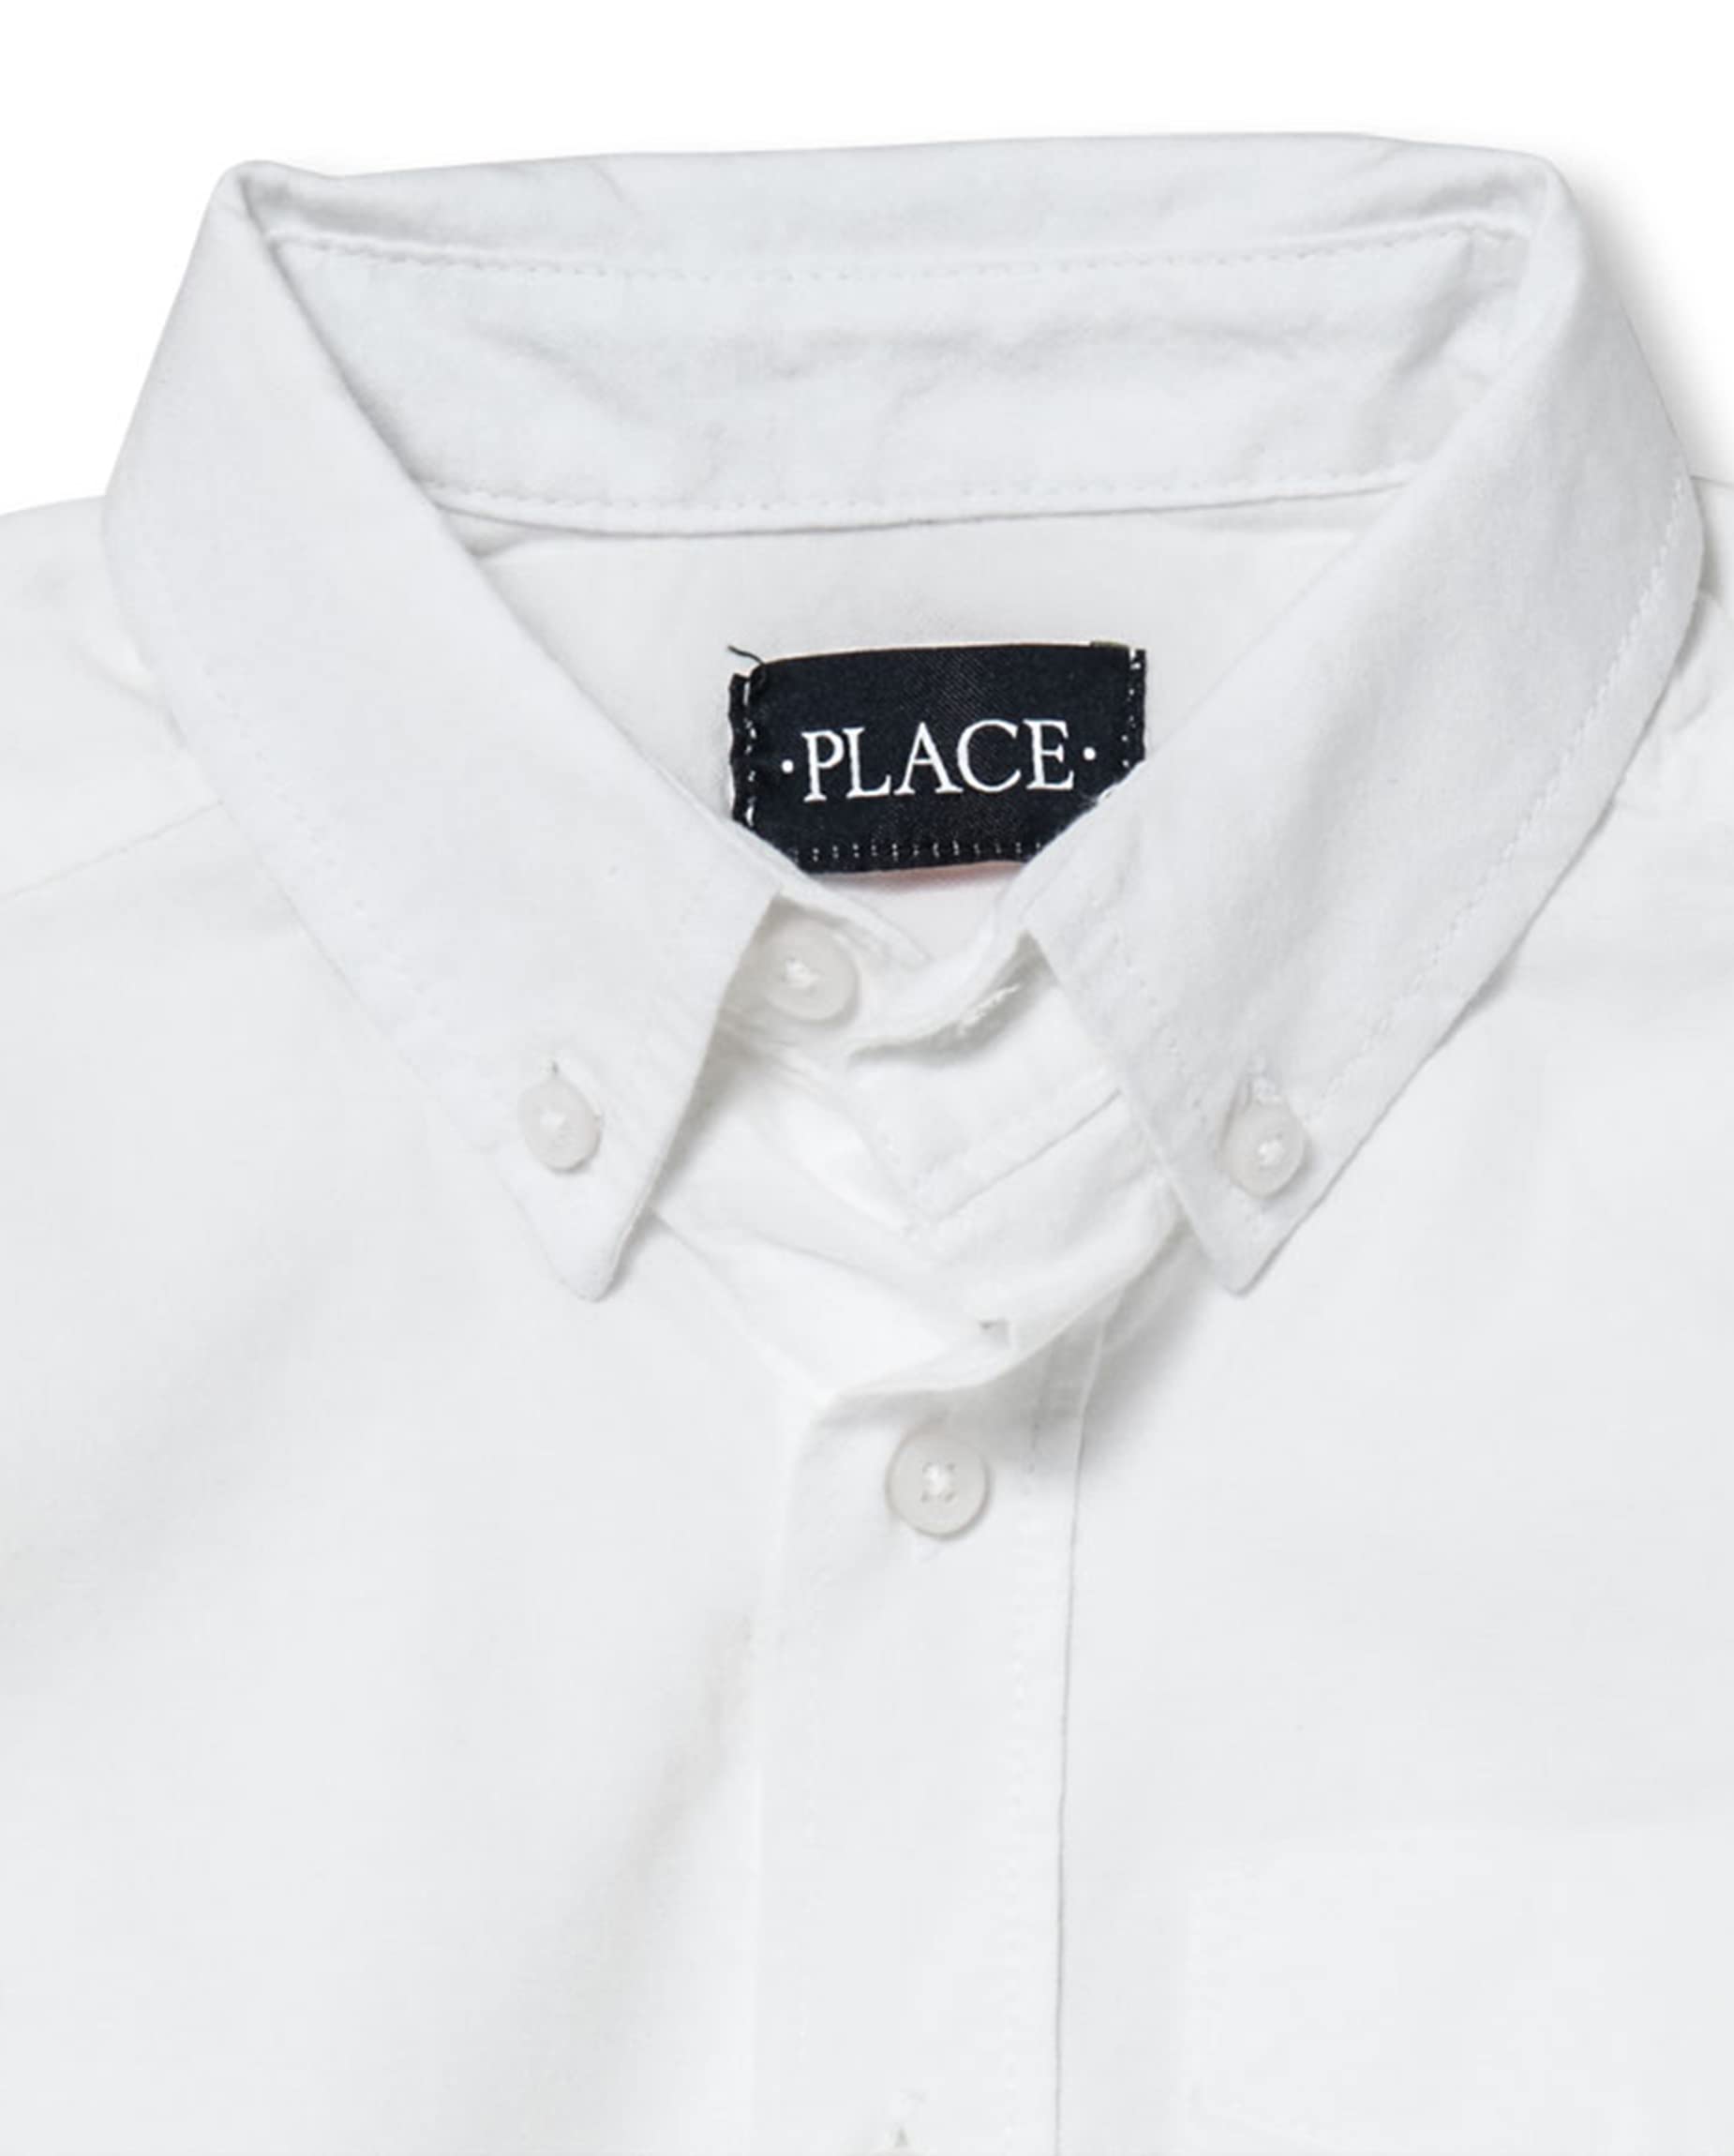 The Children's Place Boys' Long Sleeve Oxford Shirt